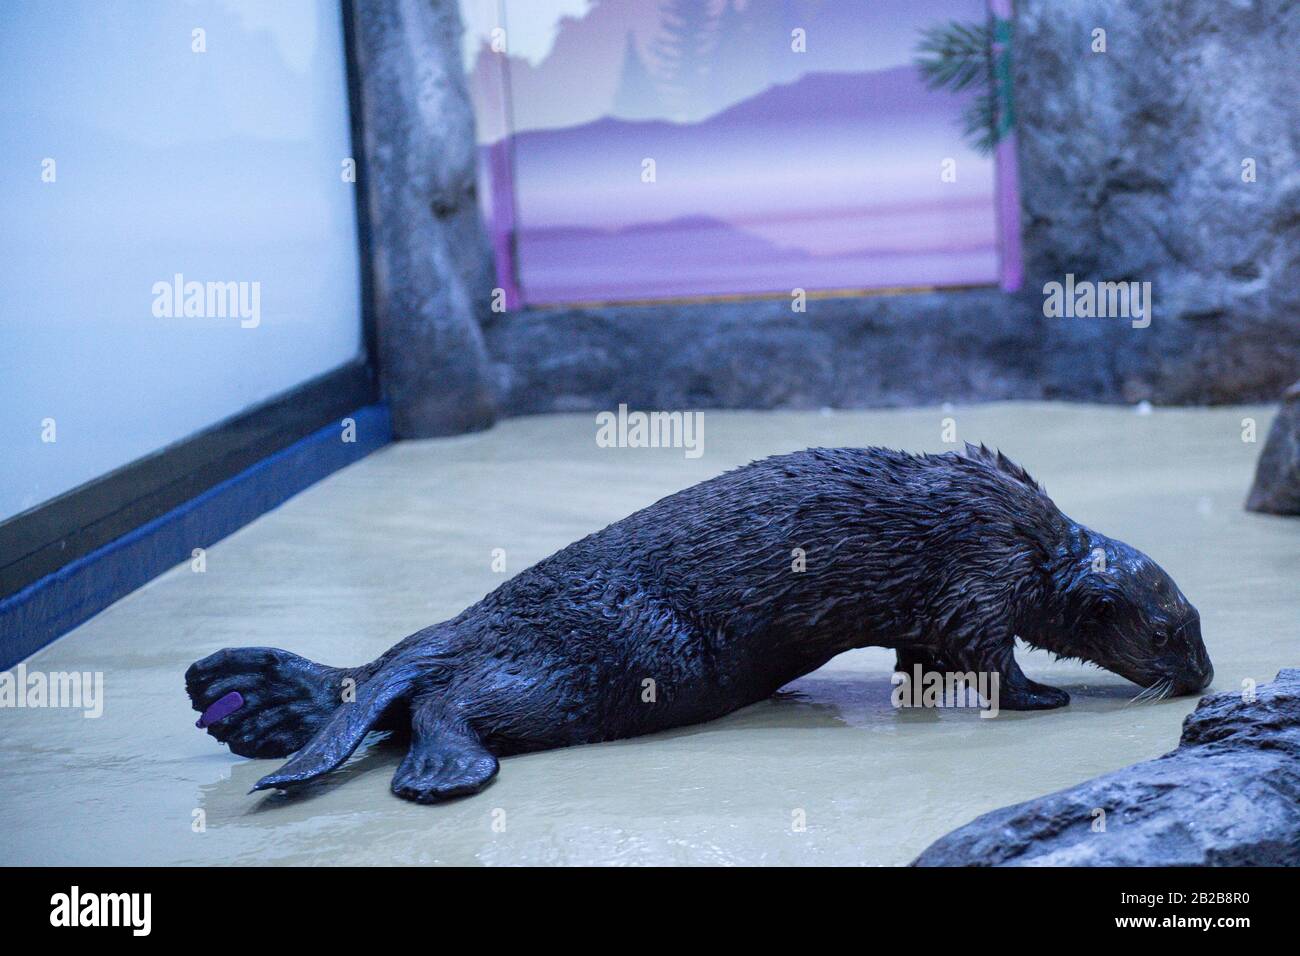 Alaskan Sea Otter Ola explores her new home at the National SEA LIFE Centre  in Birmingham. The otter was brought to the UK earlier this year after it  was rescued and cared